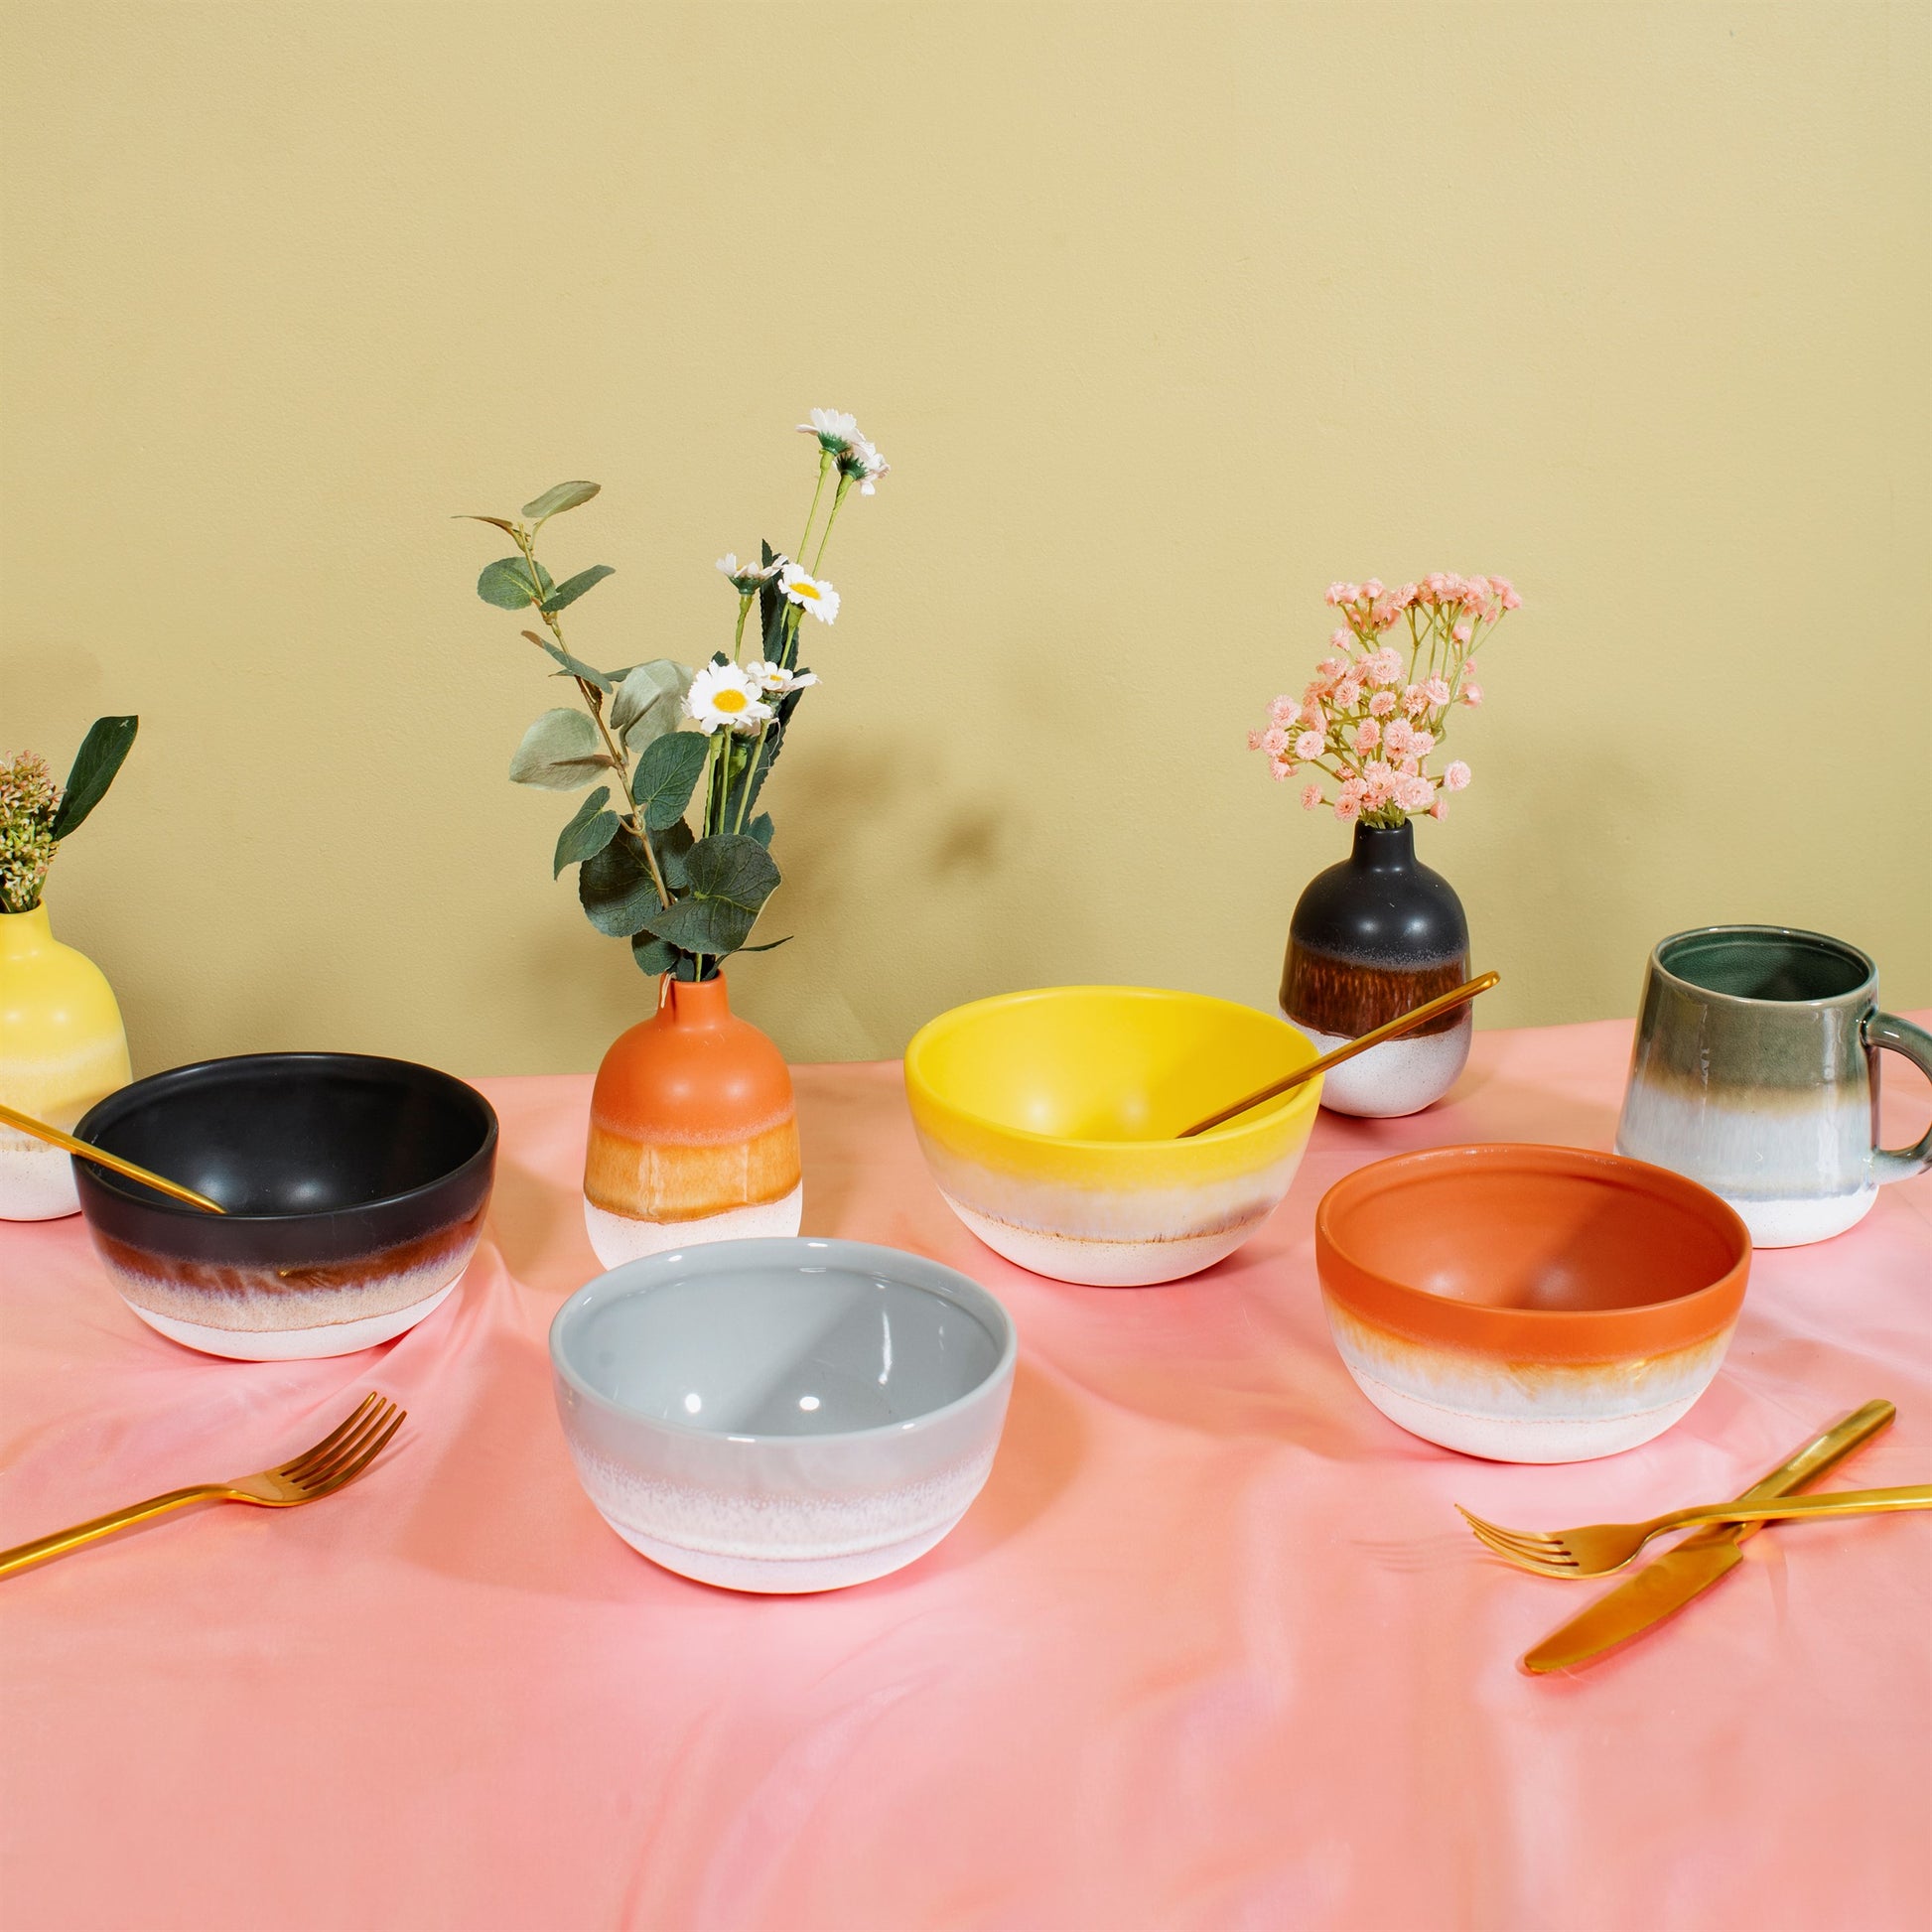 Mojave Bowls from Home and Bay